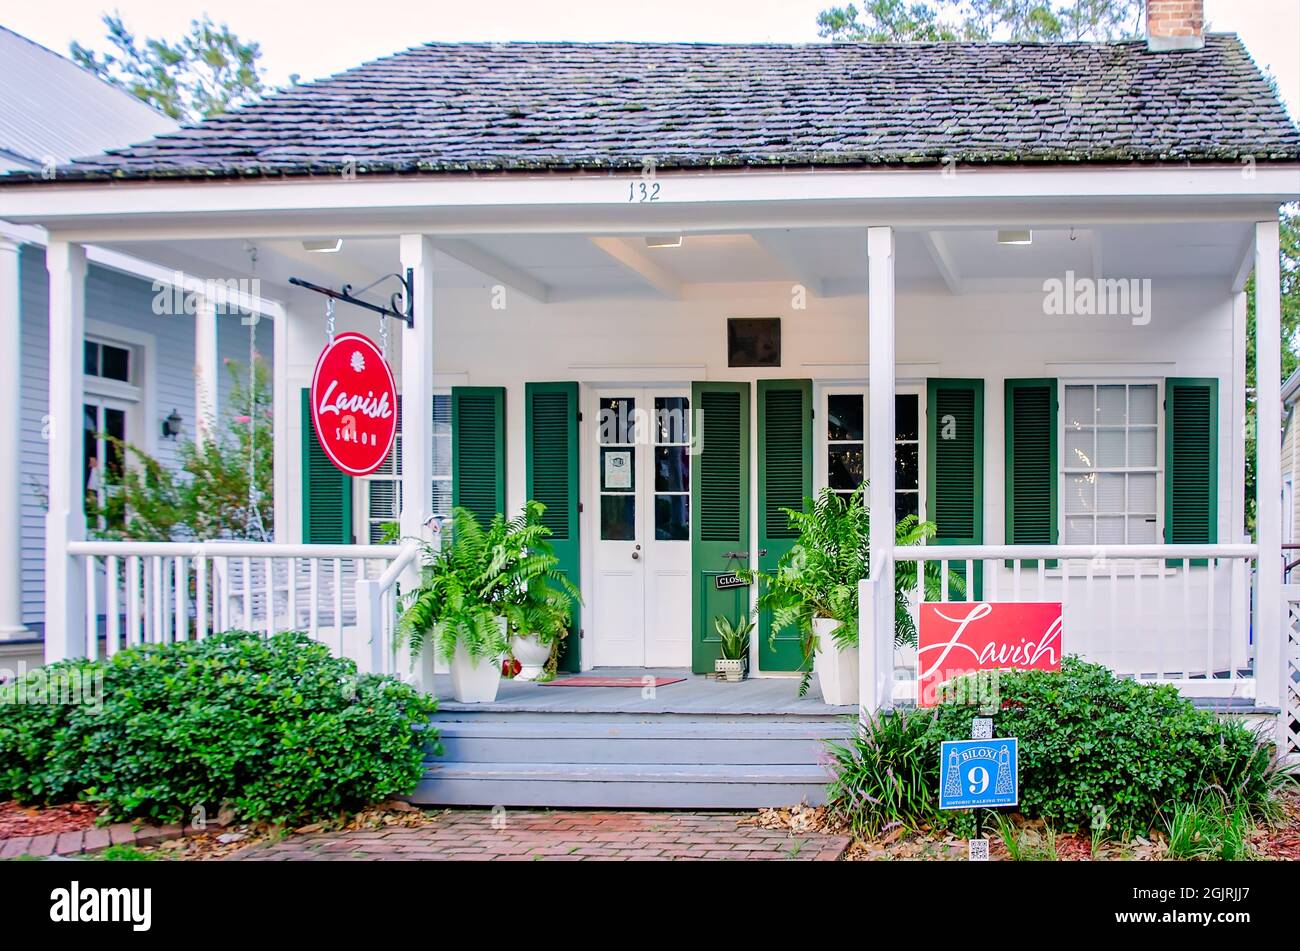 The historic Creole Cottage is now home to Lavish Salon, Sept. 5, 2021, in Biloxi, Mississippi. The 1832 Creole Cottage was built by John Delauney. Stock Photo